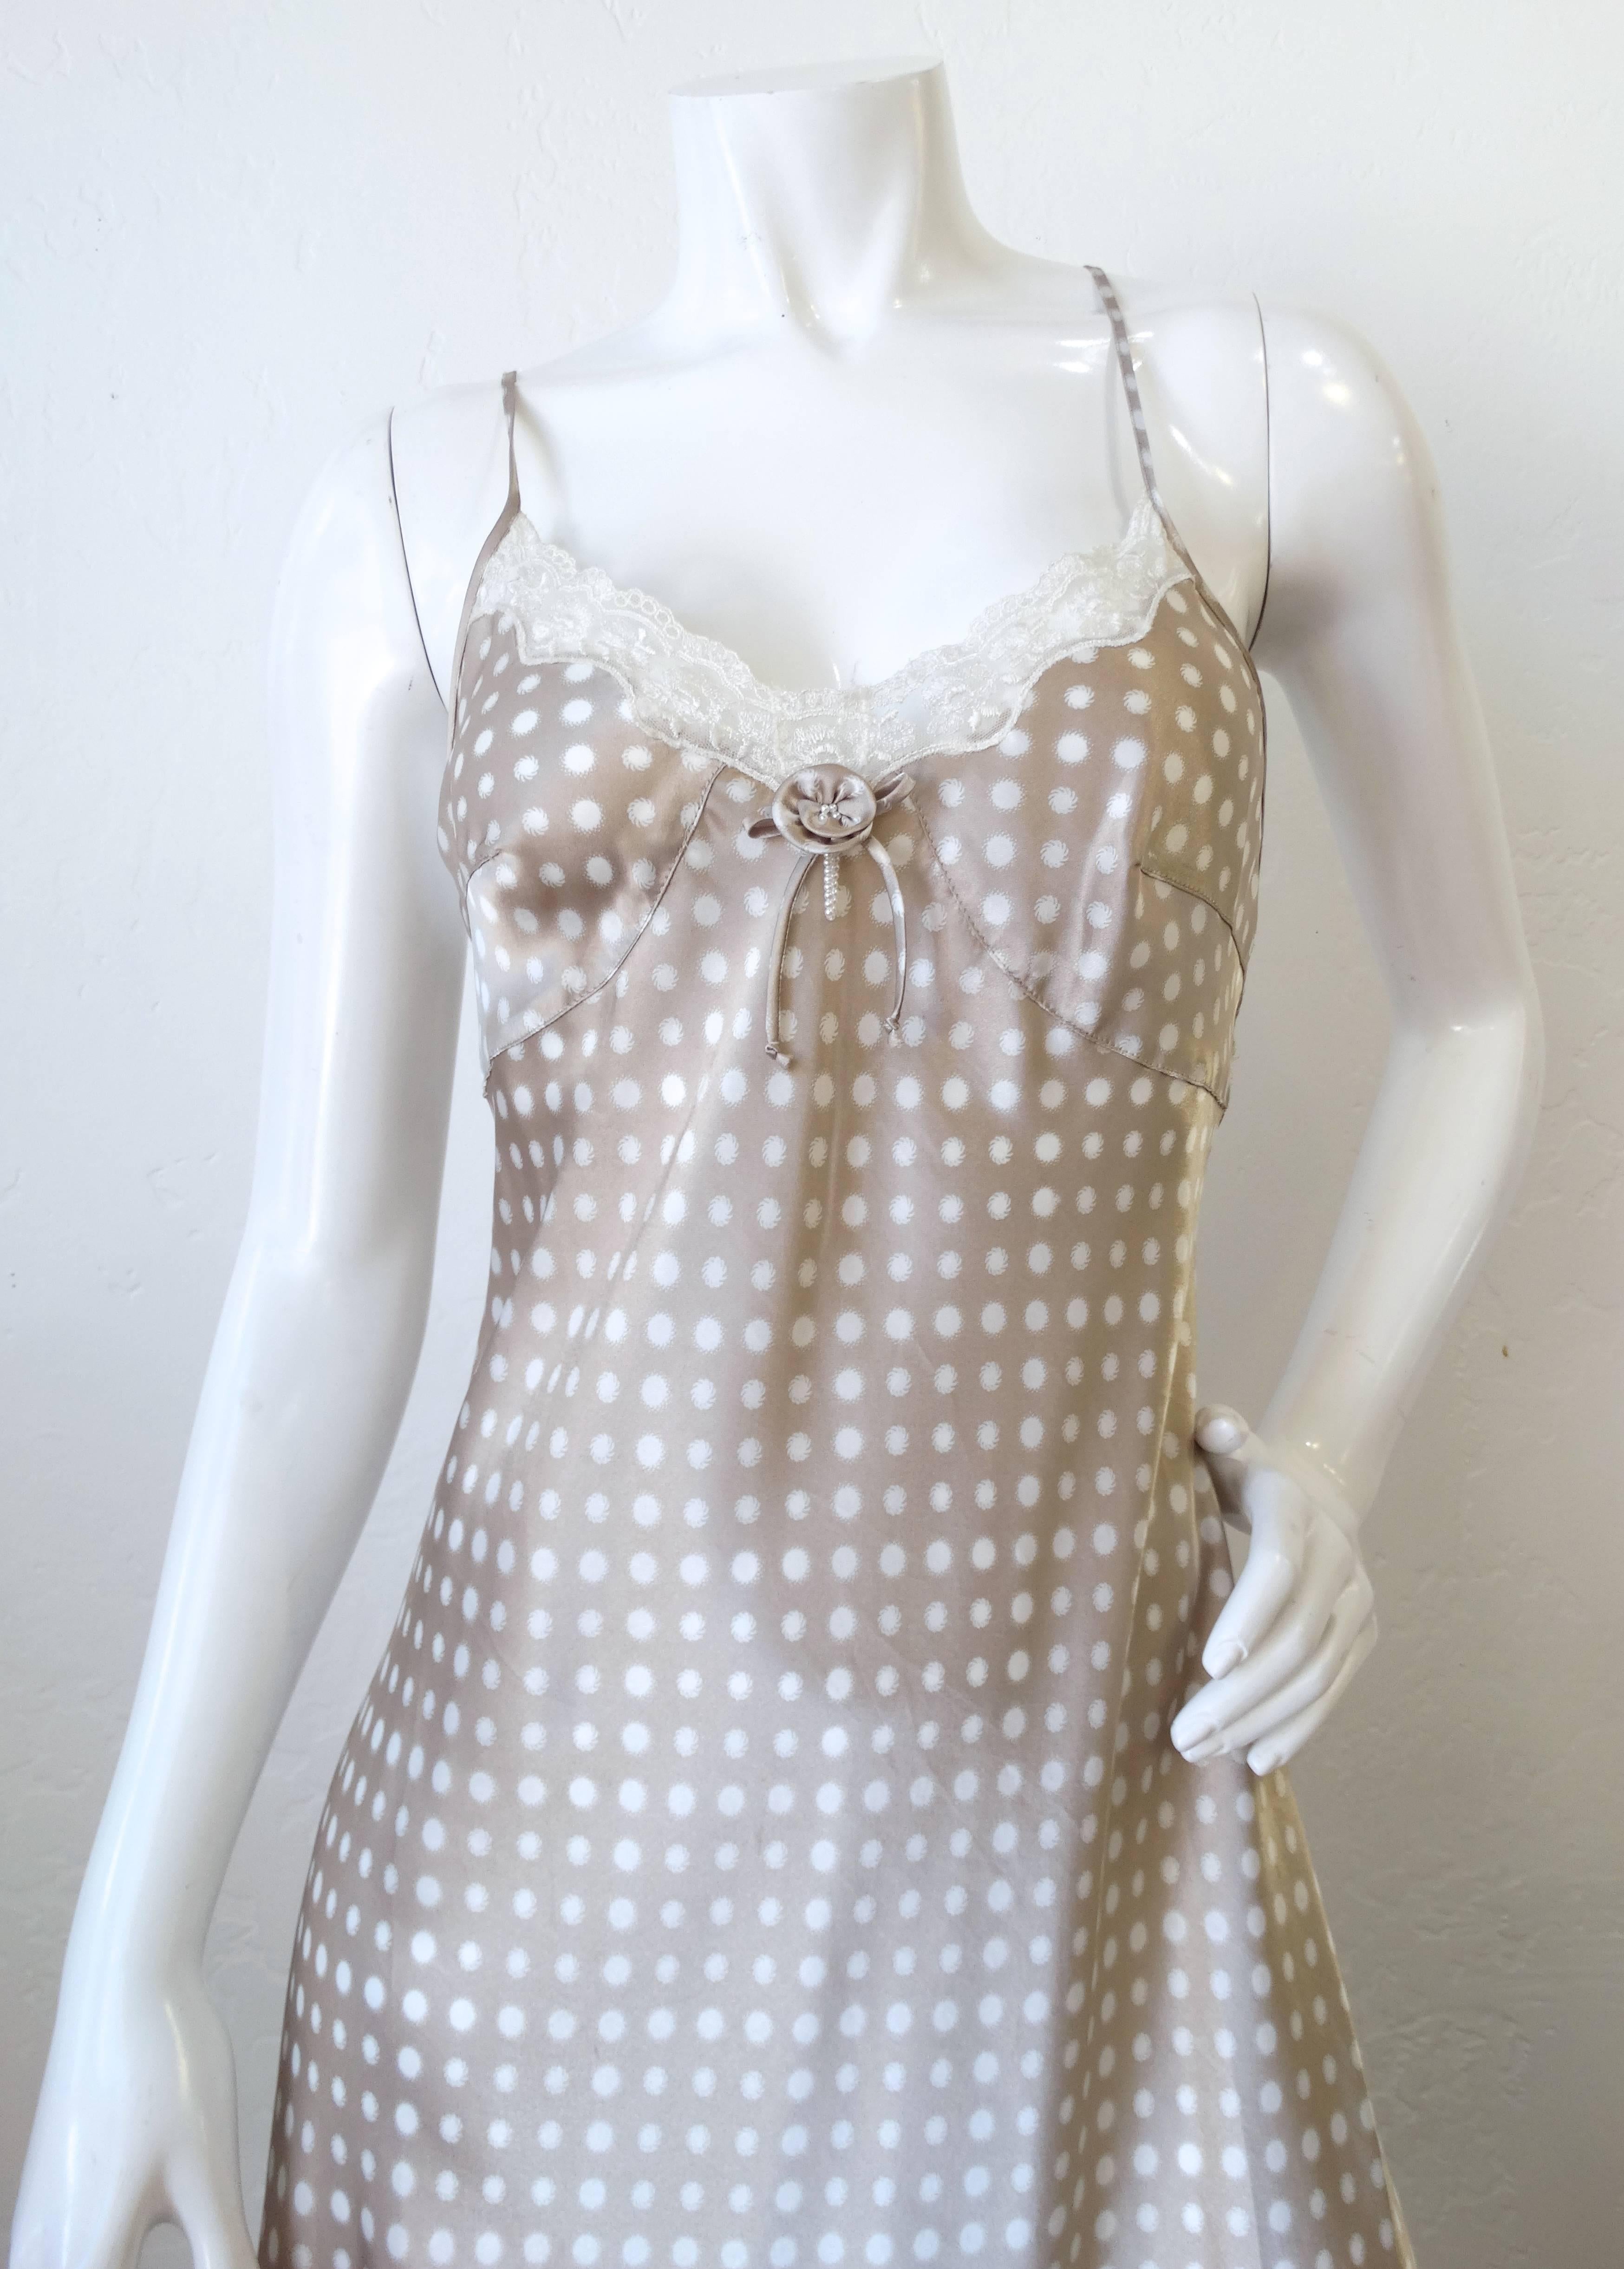 Get in on the slip dress trend with our adorable Christian Dior polka dot slip! Made of a silky satin, with a taupe and white polkadot all over print. trimmed along the bust with creamy white lace. Flower and bow detail at the center of the bust.